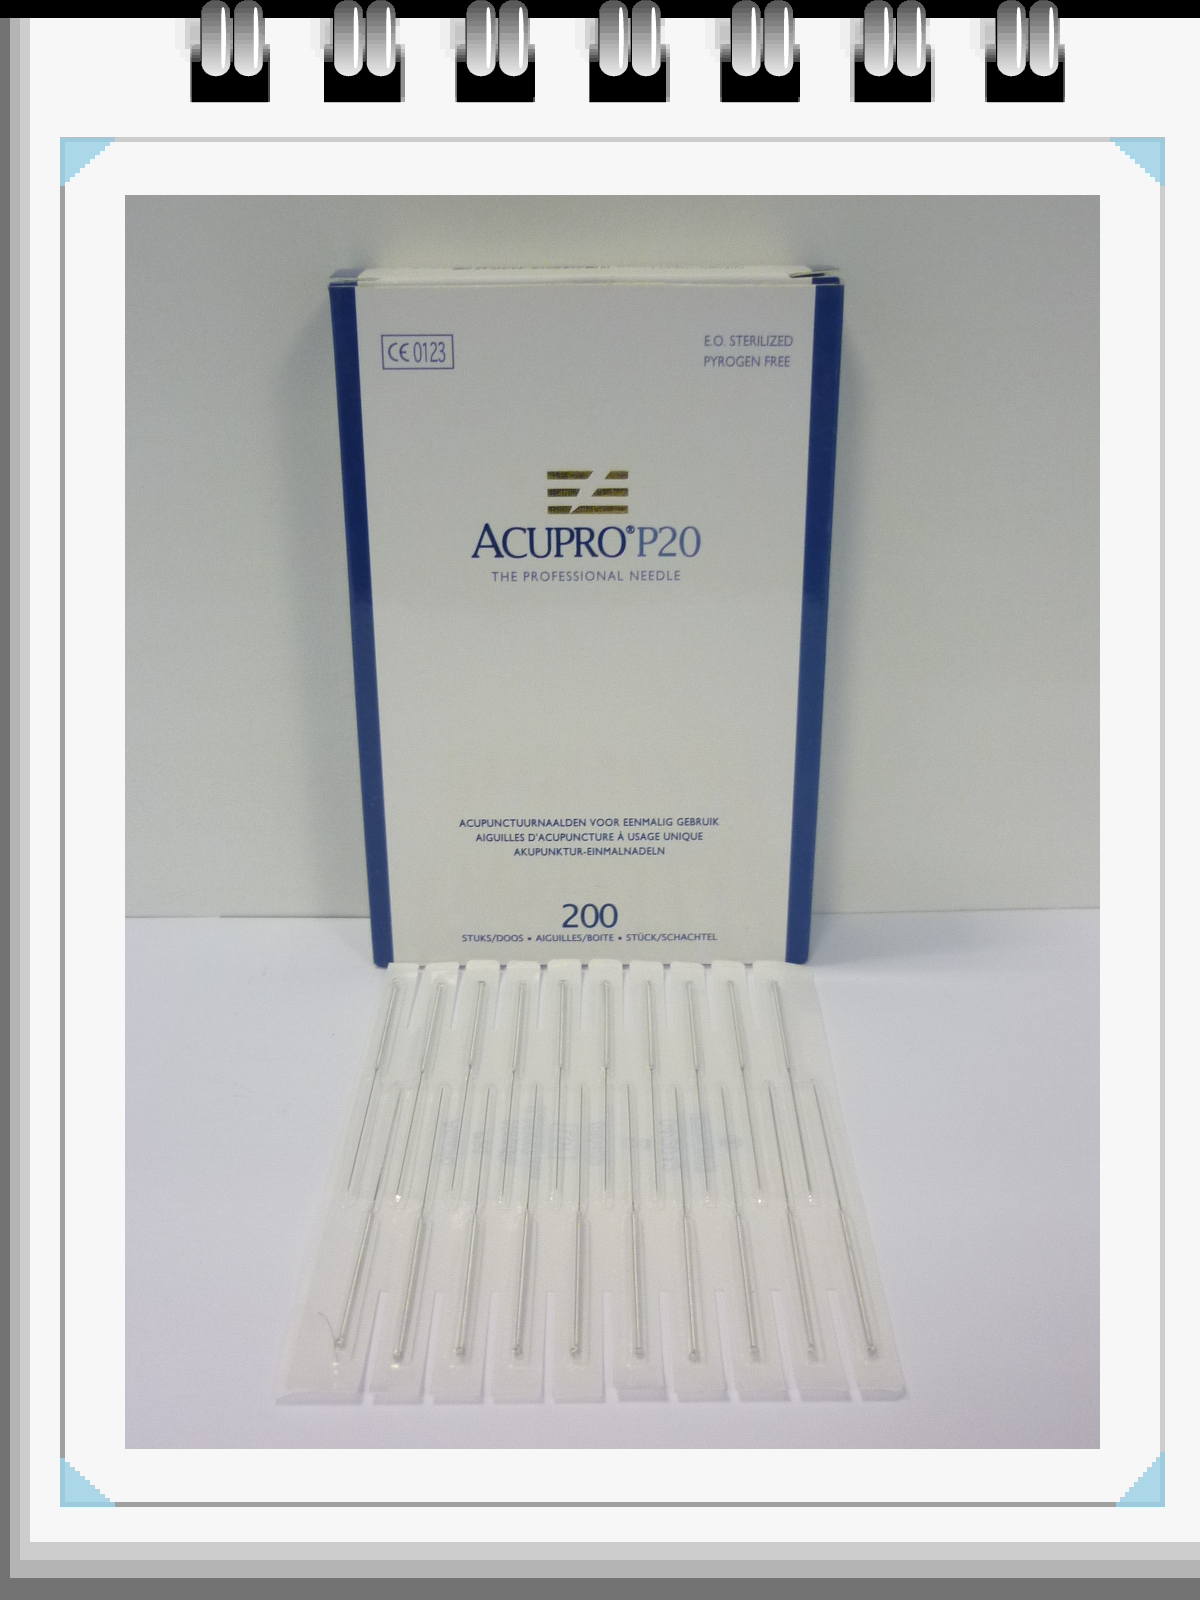 All Products - Aiguilles Accupuncture 0,25 x 25mm - p--200